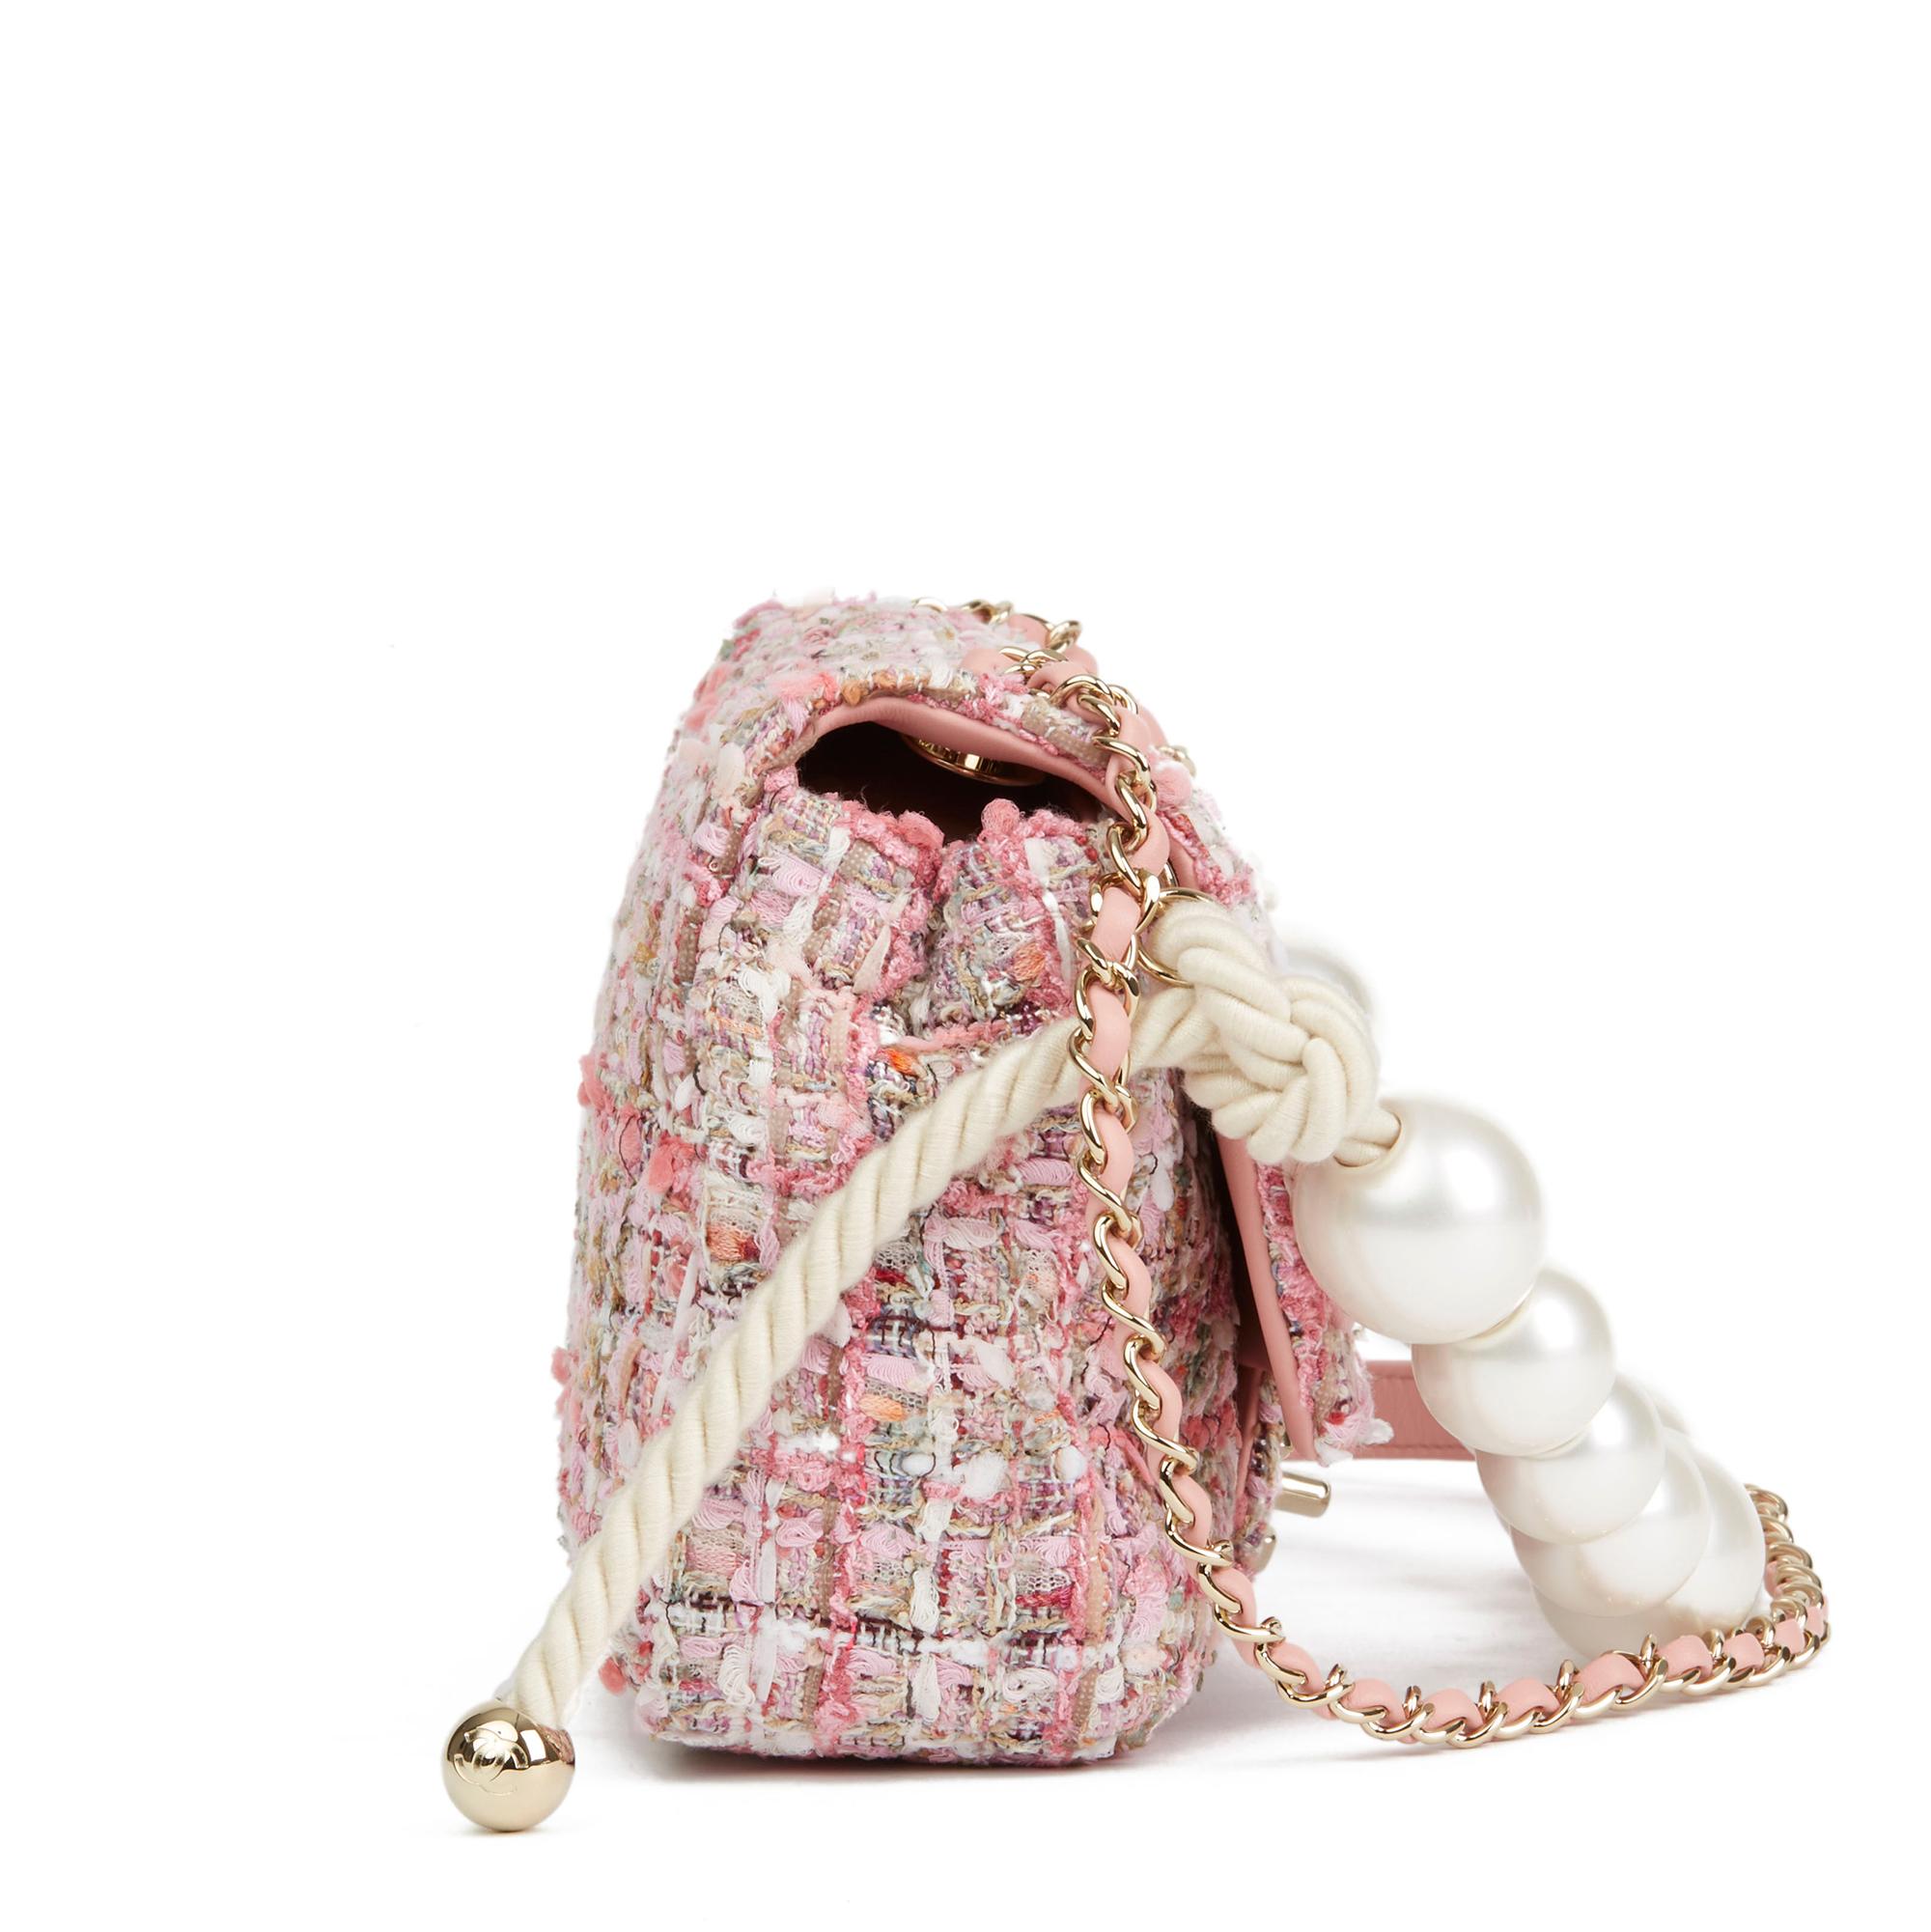 CHANEL
Pink Tweed Fabric & Pearls Classic Single Flap Bag

Reference: HB2759
Serial Number: 27958864
Age (Circa): 2019
Accompanied By: Chanel Dust Bag, Box, Authenticity Card, Care Booklet, Harrods Receipt, Protective Felt
Authenticity Details: